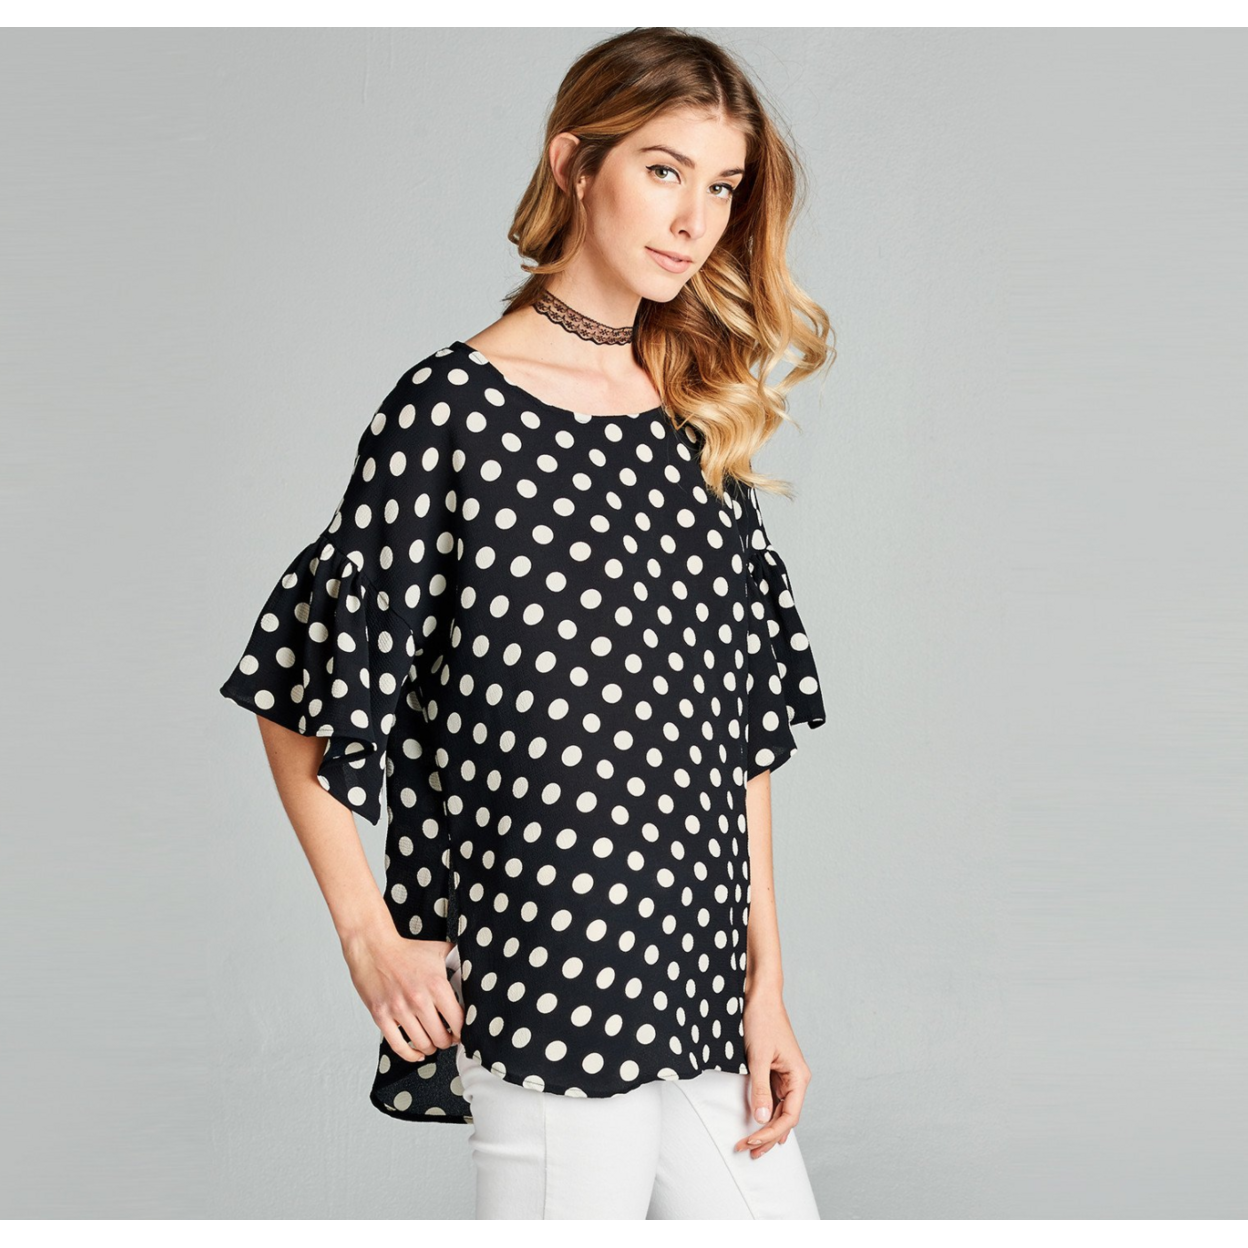 Polka Dot Relaxed Fit Bell Sleeve Top - Black, Large (14-16)